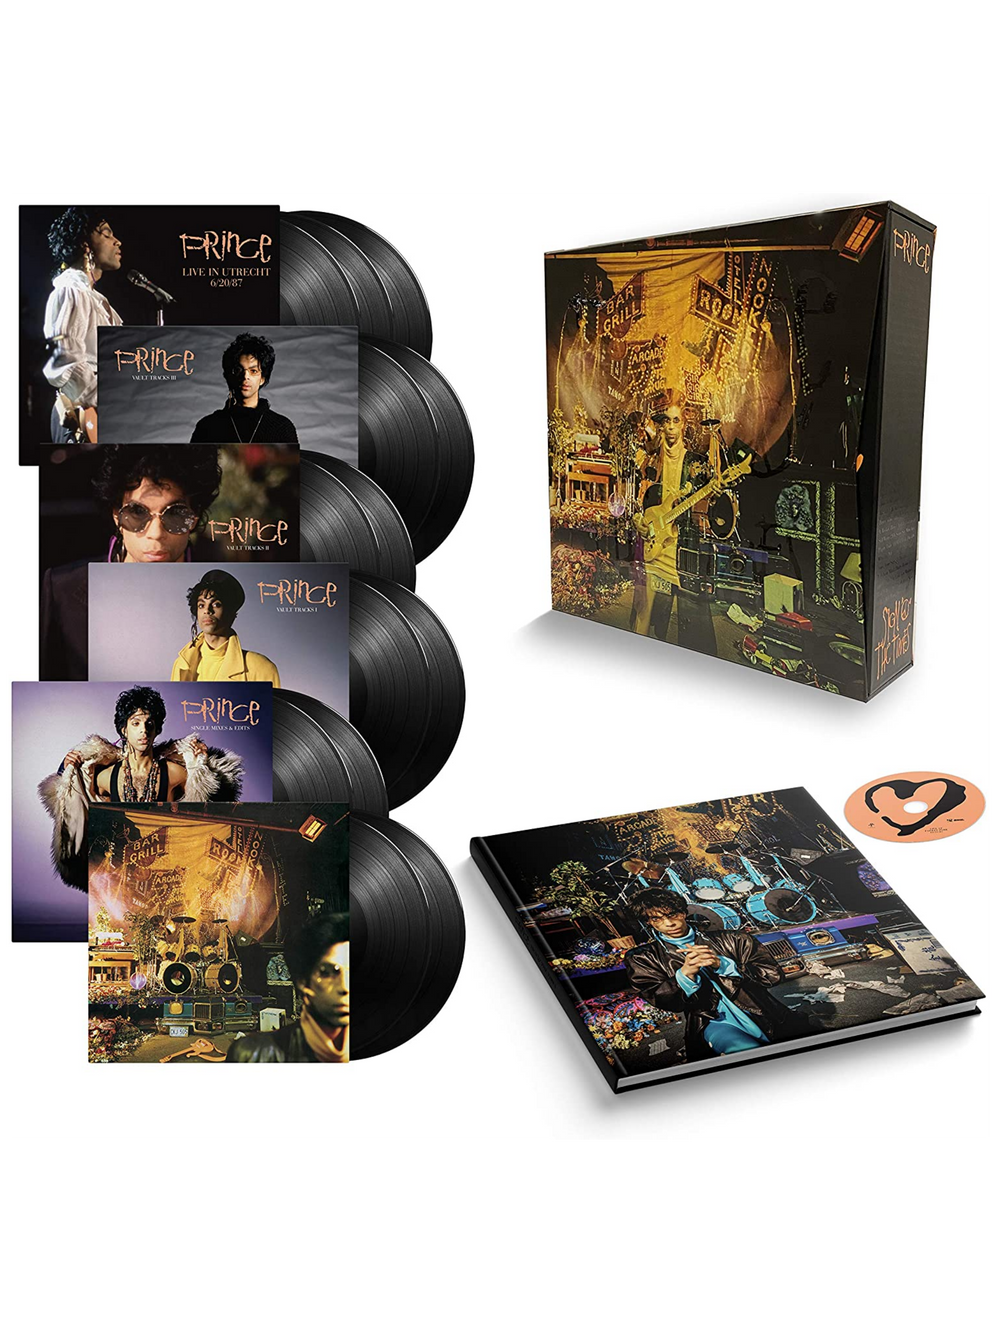 Prince – Sign "O" The Times SDE 13 x Vinyl + 1 DVD Boxed Set Reissue RM NEW 2020